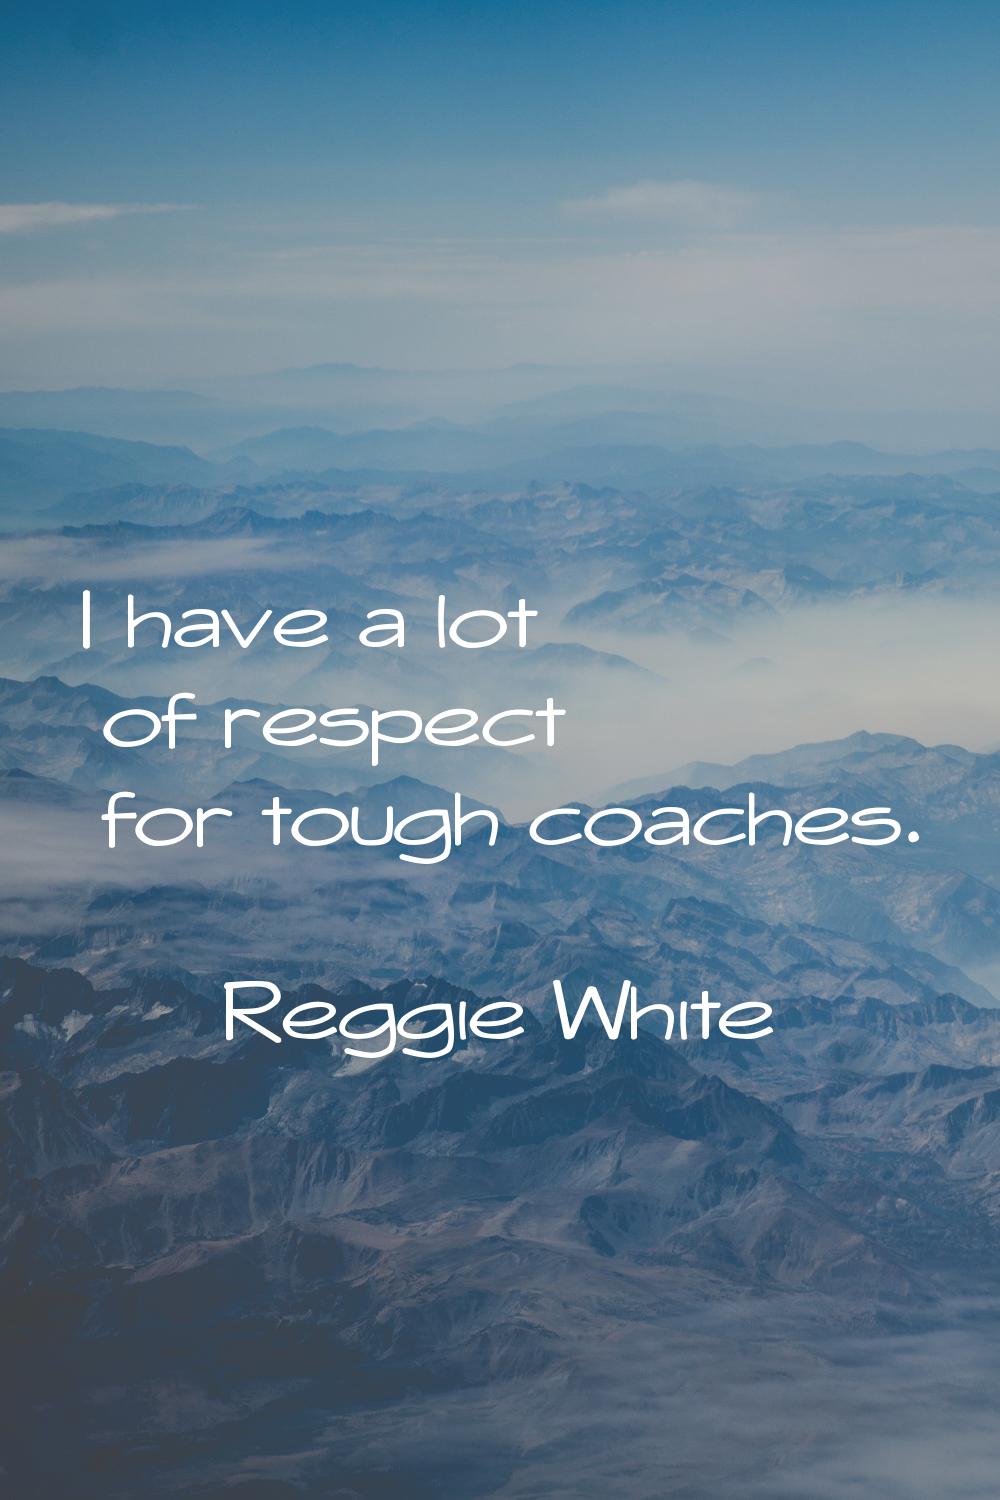 I have a lot of respect for tough coaches.